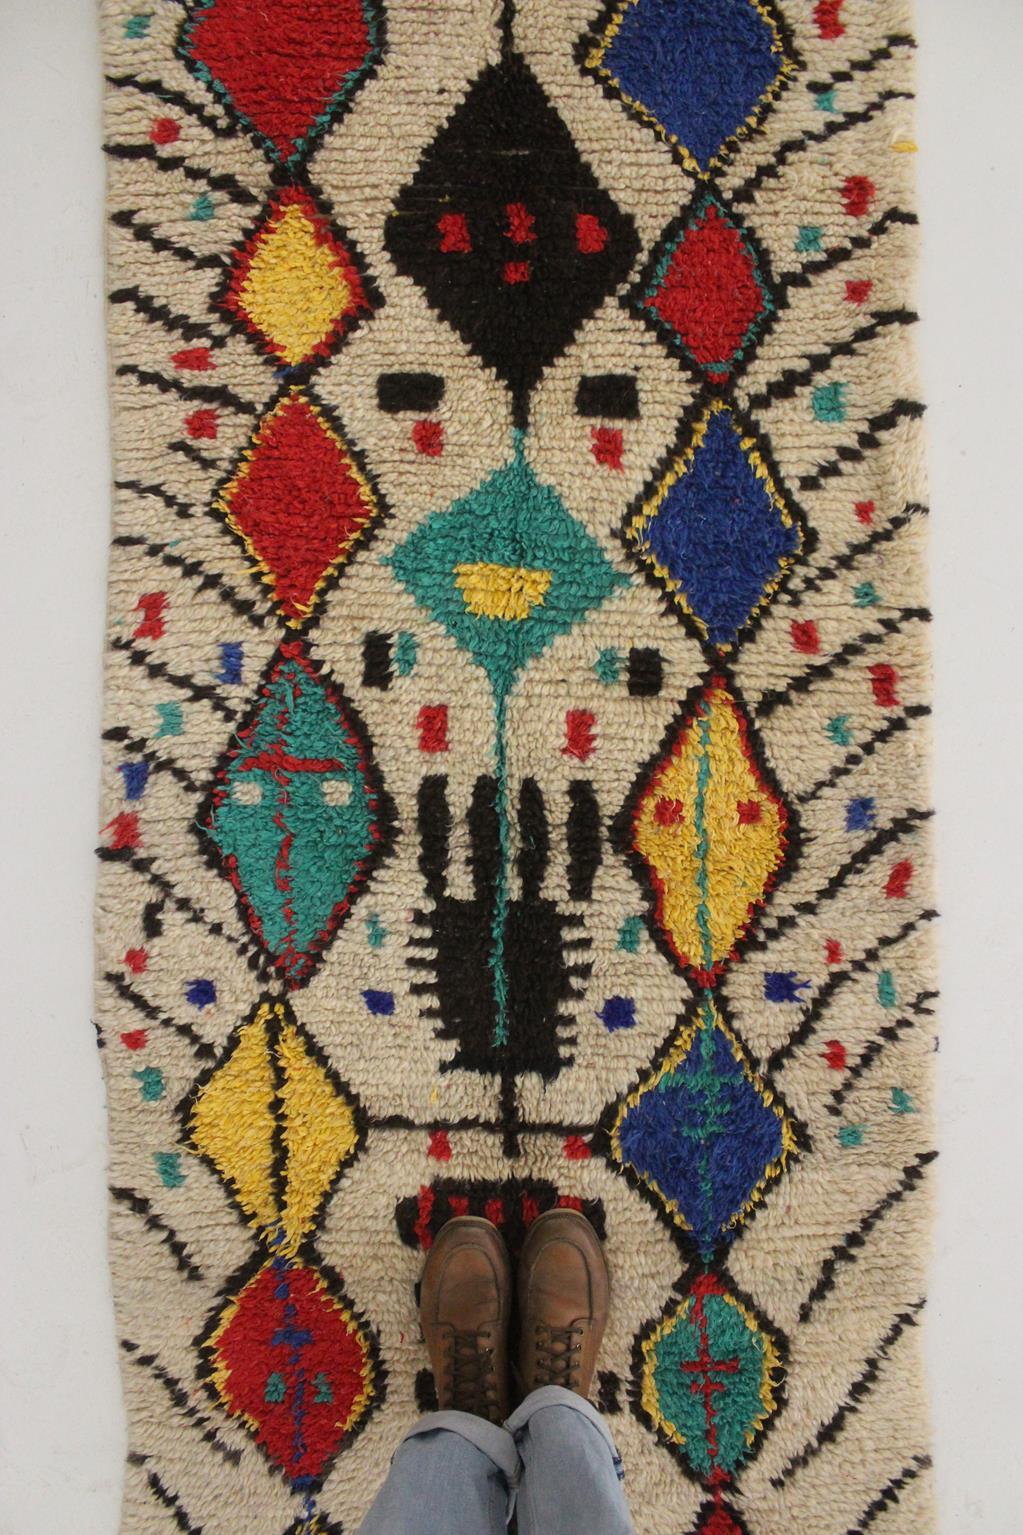 Vintage Moroccan Azilal runner rug - 3.1x11.3feet / 95x345cm For Sale 2